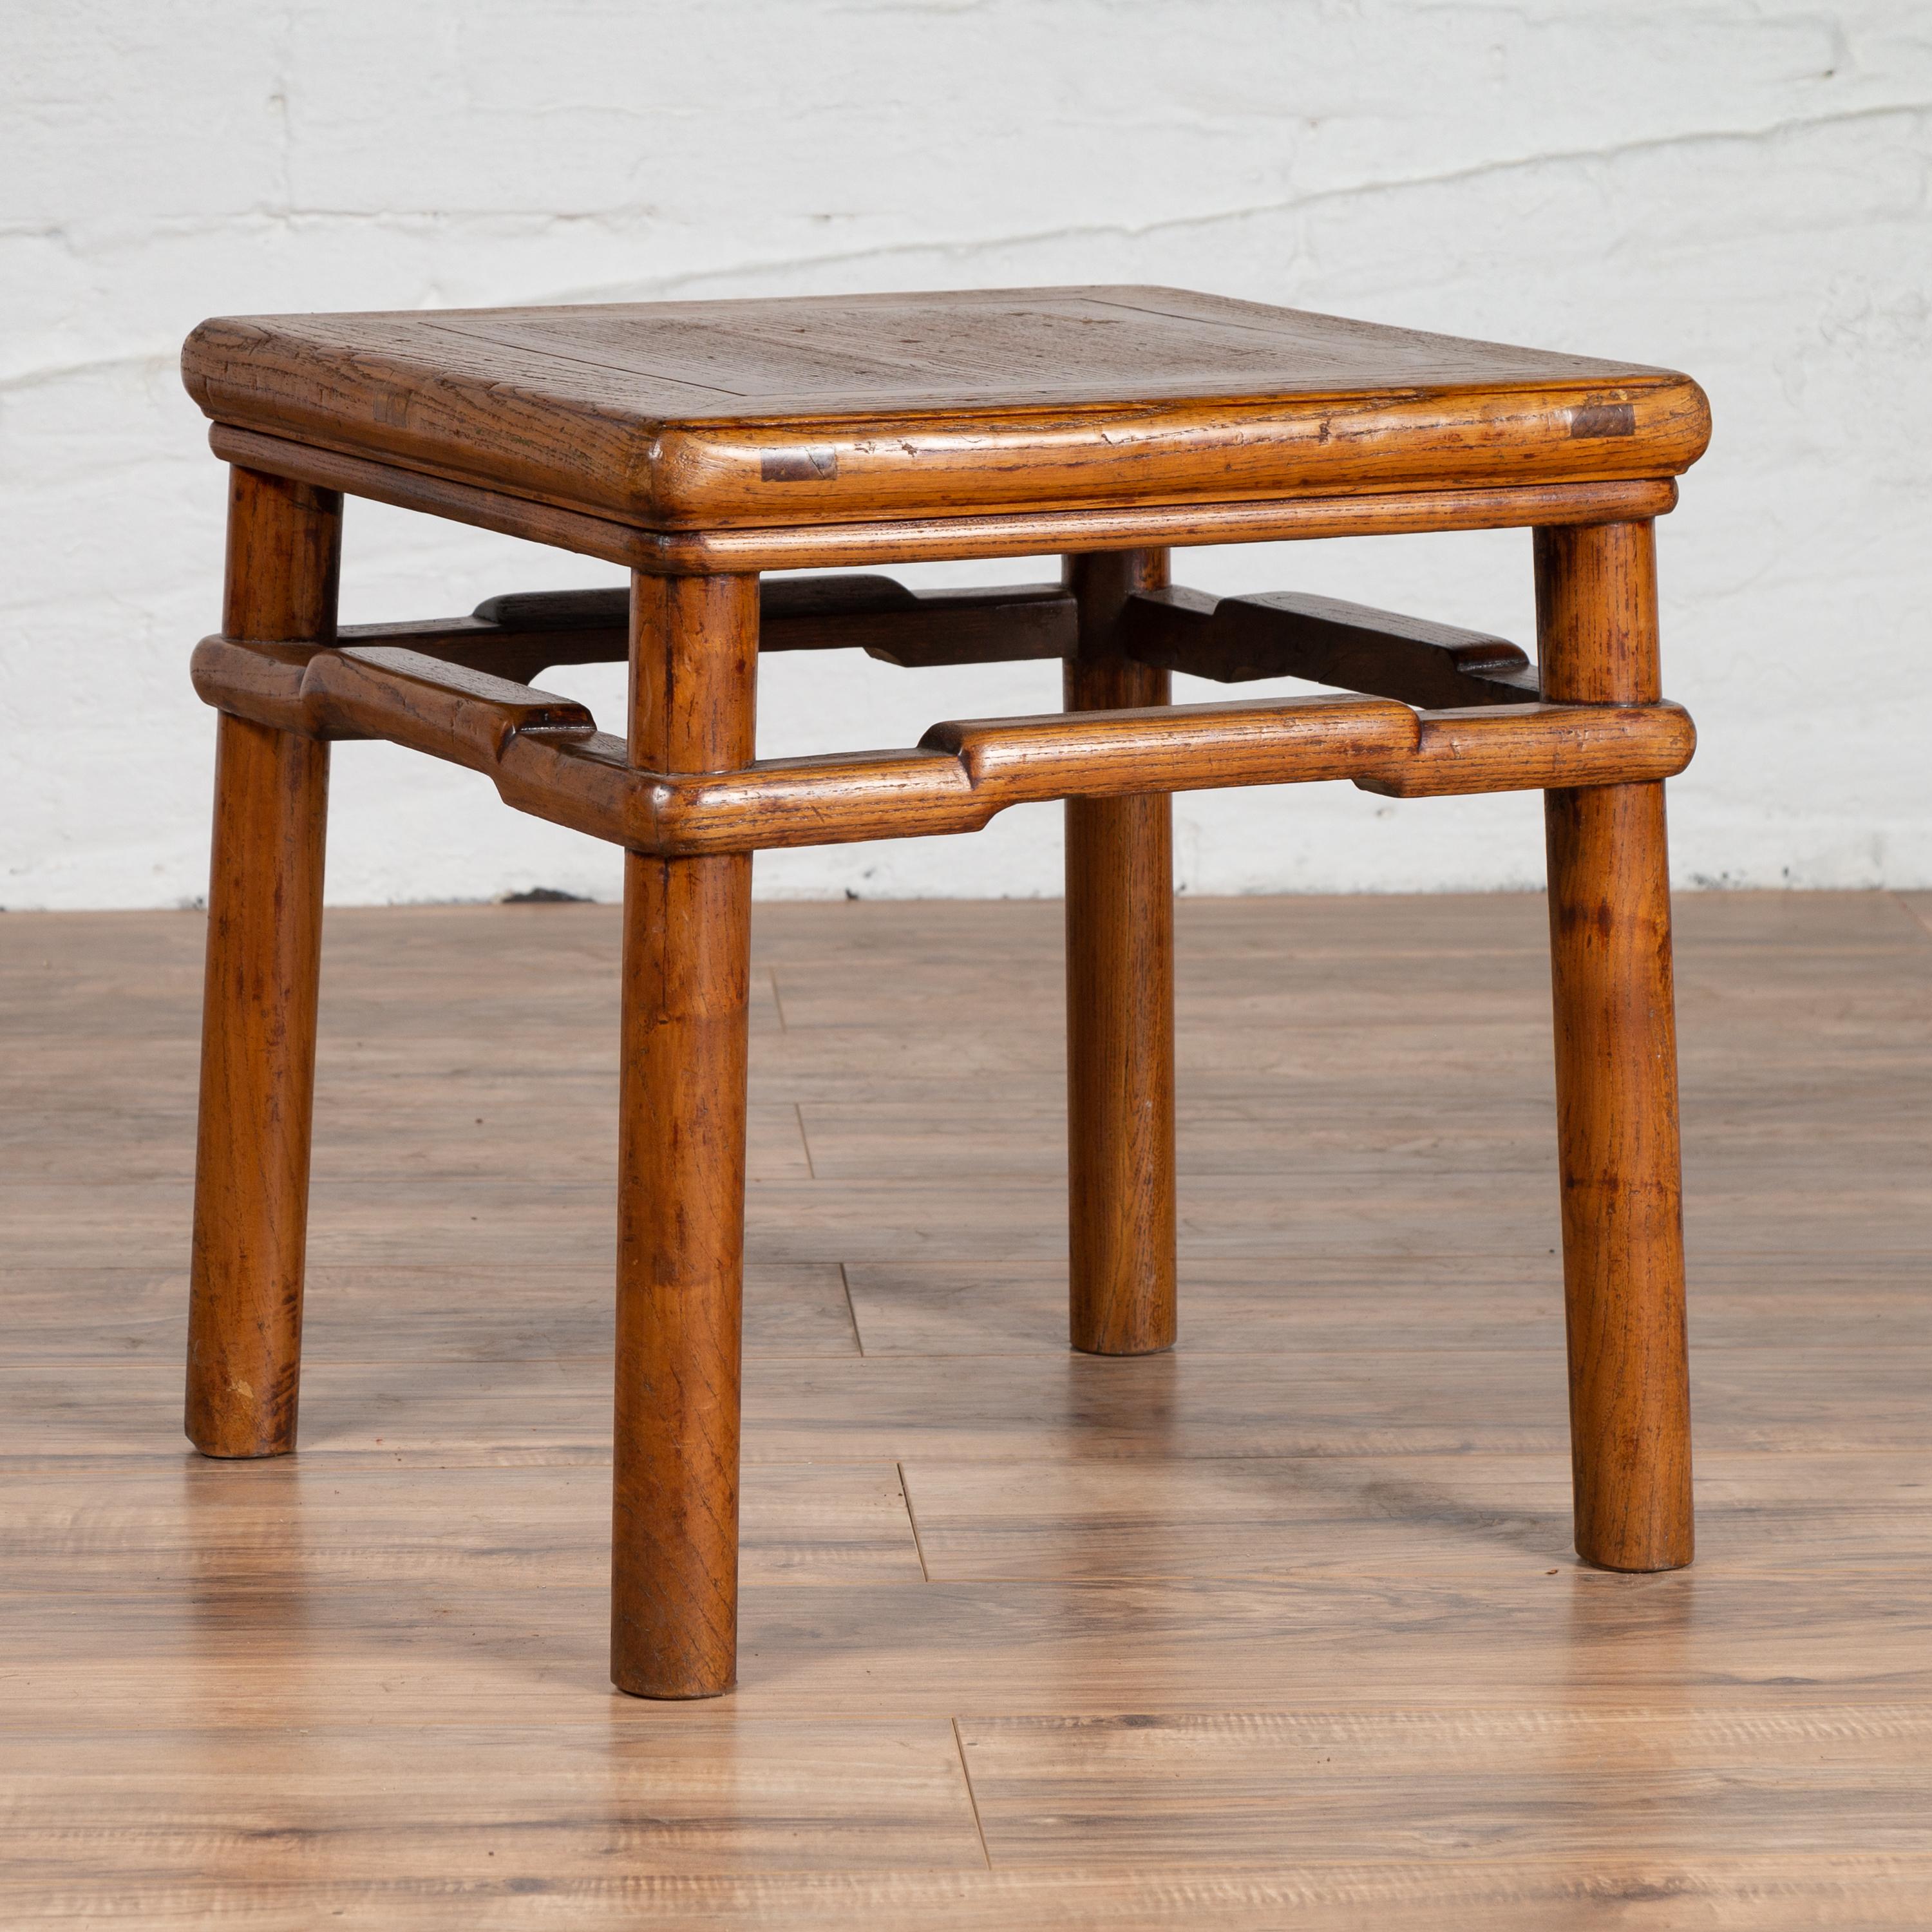 A vintage Chinese Ming dynasty style natural wood side table from the mid-20th century, with humpbacked stretcher, rich grain and cylindrical legs. Born in China during the mid-century period, this charming side table features a square top with